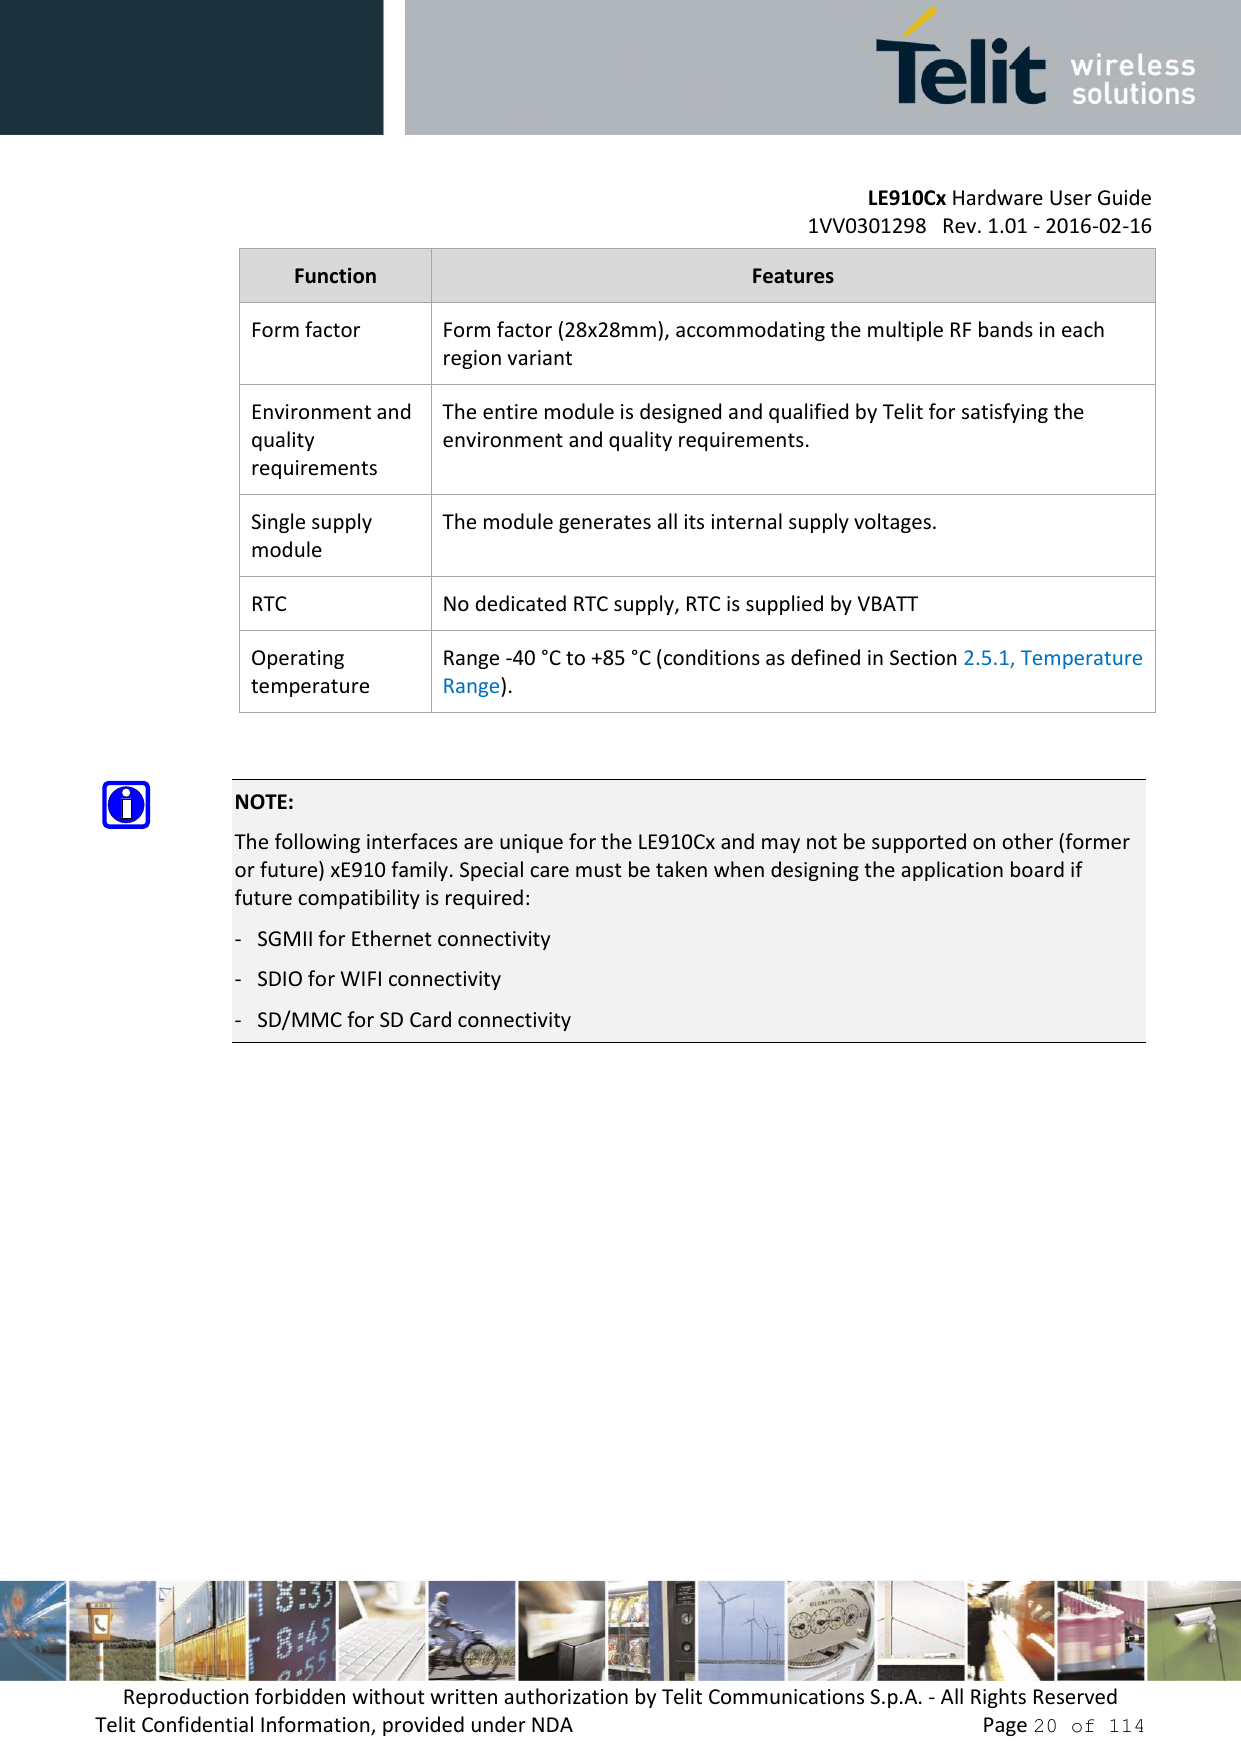         LE910Cx Hardware User Guide     1VV0301298   Rev. 1.01 - 2016-02-16 Reproduction forbidden without written authorization by Telit Communications S.p.A. - All Rights Reserved Telit Confidential Information, provided under NDA                 Page 20 of 114 Function Features Form factor Form factor (28x28mm), accommodating the multiple RF bands in each region variant Environment and quality requirements The entire module is designed and qualified by Telit for satisfying the environment and quality requirements.  Single supply module The module generates all its internal supply voltages. RTC No dedicated RTC supply, RTC is supplied by VBATT  Operating temperature Range -40 °C to +85 °C (conditions as defined in Section 2.5.1, Temperature Range).   NOTE: The following interfaces are unique for the LE910Cx and may not be supported on other (former or future) xE910 family. Special care must be taken when designing the application board if future compatibility is required: -   SGMII for Ethernet connectivity  -   SDIO for WIFI connectivity -   SD/MMC for SD Card connectivity   